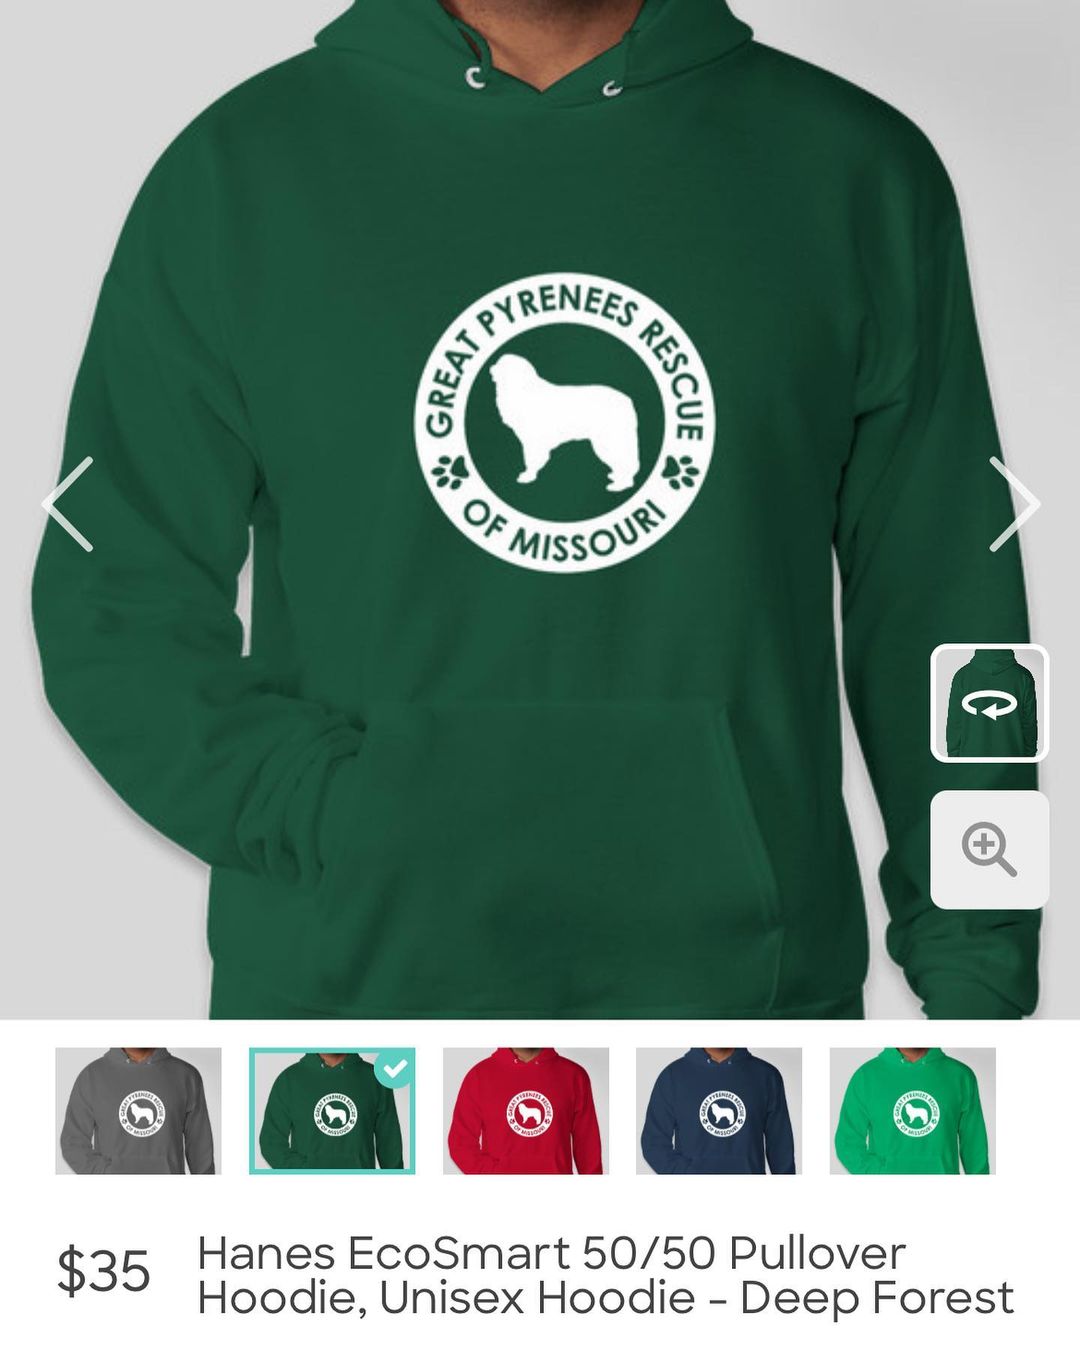 Hoodie sale fundraiser going on now! Link on our Facebook or send us a DM! Only 4 days left to order.
🐾

<a target='_blank' href='https://www.instagram.com/explore/tags/greatPyrenees/'>#greatPyrenees</a> <a target='_blank' href='https://www.instagram.com/explore/tags/greatpyreneesofthehour/'>#greatpyreneesofthehour</a> <a target='_blank' href='https://www.instagram.com/explore/tags/greatpyreneesoftheday/'>#greatpyreneesoftheday</a> <a target='_blank' href='https://www.instagram.com/explore/tags/greatpyreneesfeature/'>#greatpyreneesfeature</a> <a target='_blank' href='https://www.instagram.com/explore/tags/greatpyrfeature/'>#greatpyrfeature</a> <a target='_blank' href='https://www.instagram.com/explore/tags/dogstagram/'>#dogstagram</a> <a target='_blank' href='https://www.instagram.com/explore/tags/dogoftheday/'>#dogoftheday</a> <a target='_blank' href='https://www.instagram.com/explore/tags/dogsofinsta/'>#dogsofinsta</a> <a target='_blank' href='https://www.instagram.com/explore/tags/petsofinstagram/'>#petsofinstagram</a> <a target='_blank' href='https://www.instagram.com/explore/tags/petstagram/'>#petstagram</a> <a target='_blank' href='https://www.instagram.com/explore/tags/polarbeardog/'>#polarbeardog</a> <a target='_blank' href='https://www.instagram.com/explore/tags/giantdogsofinstagram/'>#giantdogsofinstagram</a> <a target='_blank' href='https://www.instagram.com/explore/tags/giantbreedlovers/'>#giantbreedlovers</a> <a target='_blank' href='https://www.instagram.com/explore/tags/adoptdontshop/'>#adoptdontshop</a> <a target='_blank' href='https://www.instagram.com/explore/tags/dogsofkansascity/'>#dogsofkansascity</a> <a target='_blank' href='https://www.instagram.com/explore/tags/dogsofkc/'>#dogsofkc</a> <a target='_blank' href='https://www.instagram.com/explore/tags/dogsofmo/'>#dogsofmo</a> <a target='_blank' href='https://www.instagram.com/explore/tags/adopt/'>#adopt</a> <a target='_blank' href='https://www.instagram.com/explore/tags/foster/'>#foster</a> <a target='_blank' href='https://www.instagram.com/explore/tags/greatpyreneesrescueofmissouri/'>#greatpyreneesrescueofmissouri</a> <a target='_blank' href='https://www.instagram.com/explore/tags/greatpyreneesrescueofmo/'>#greatpyreneesrescueofmo</a>